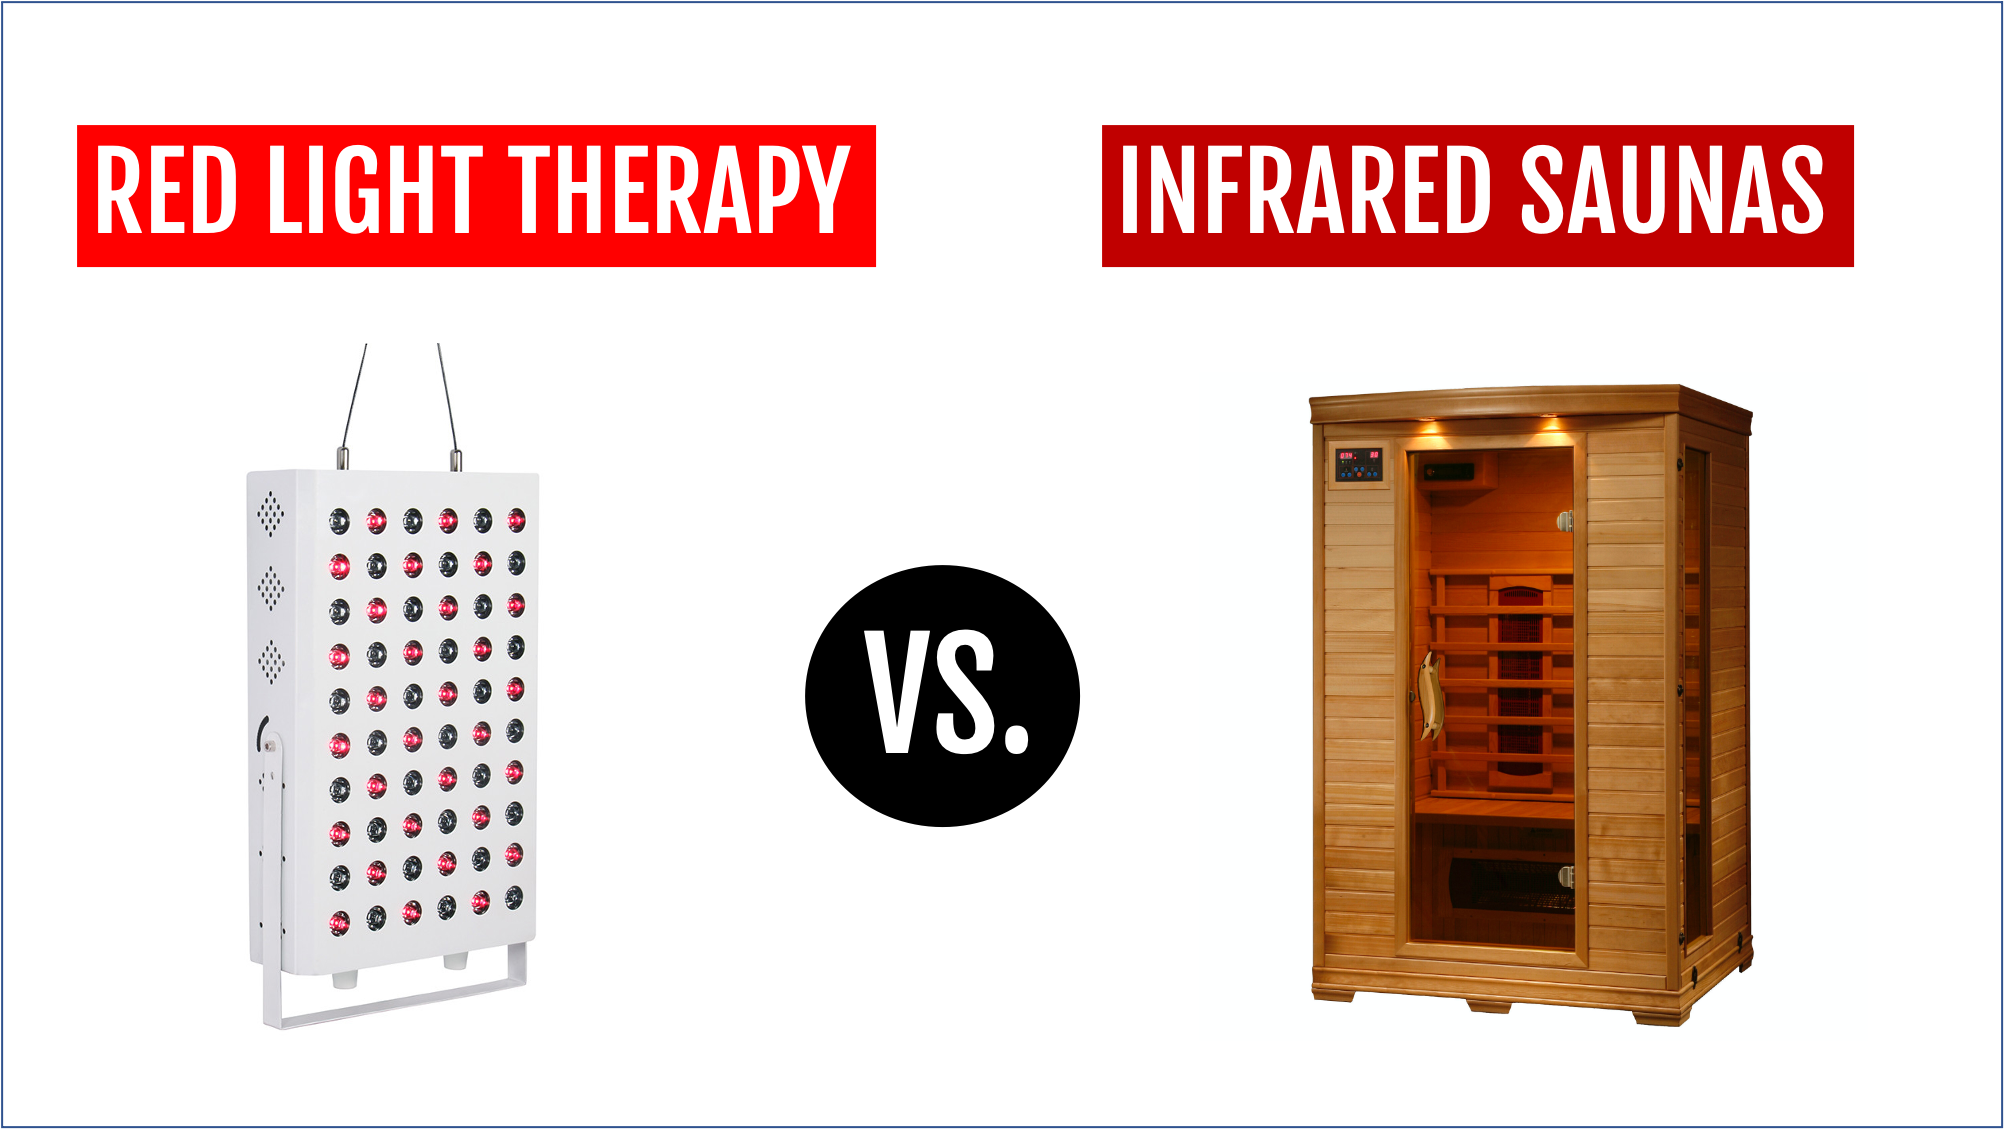 Red Light Therapy vs. Infrared Saunas